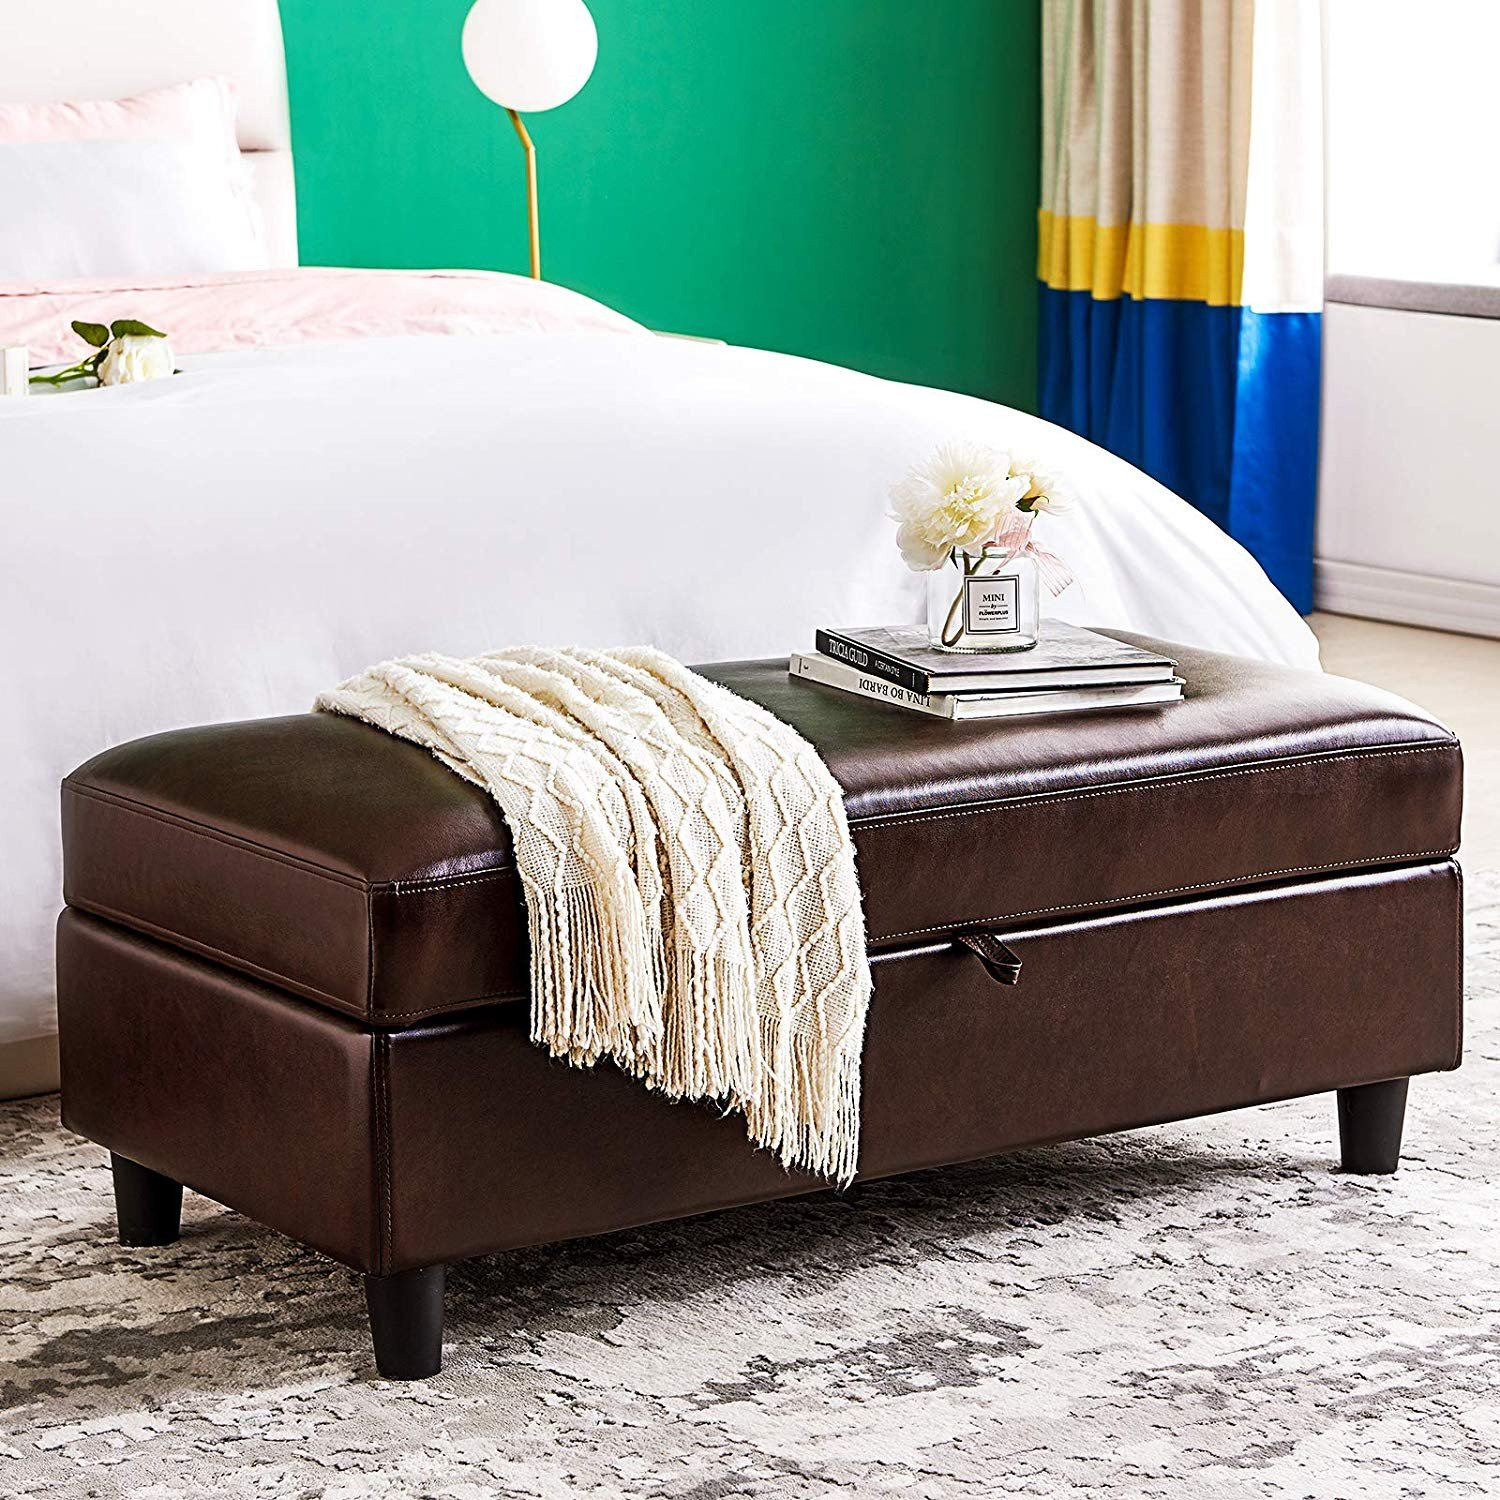 Bedroom Ottoman Storage Bench Awesome Honbay 45 Inch Faux Leather Storage Bench Ottoman Rectangular Leather Bench with Storage Ottoman with Hydraulic Rod Brown